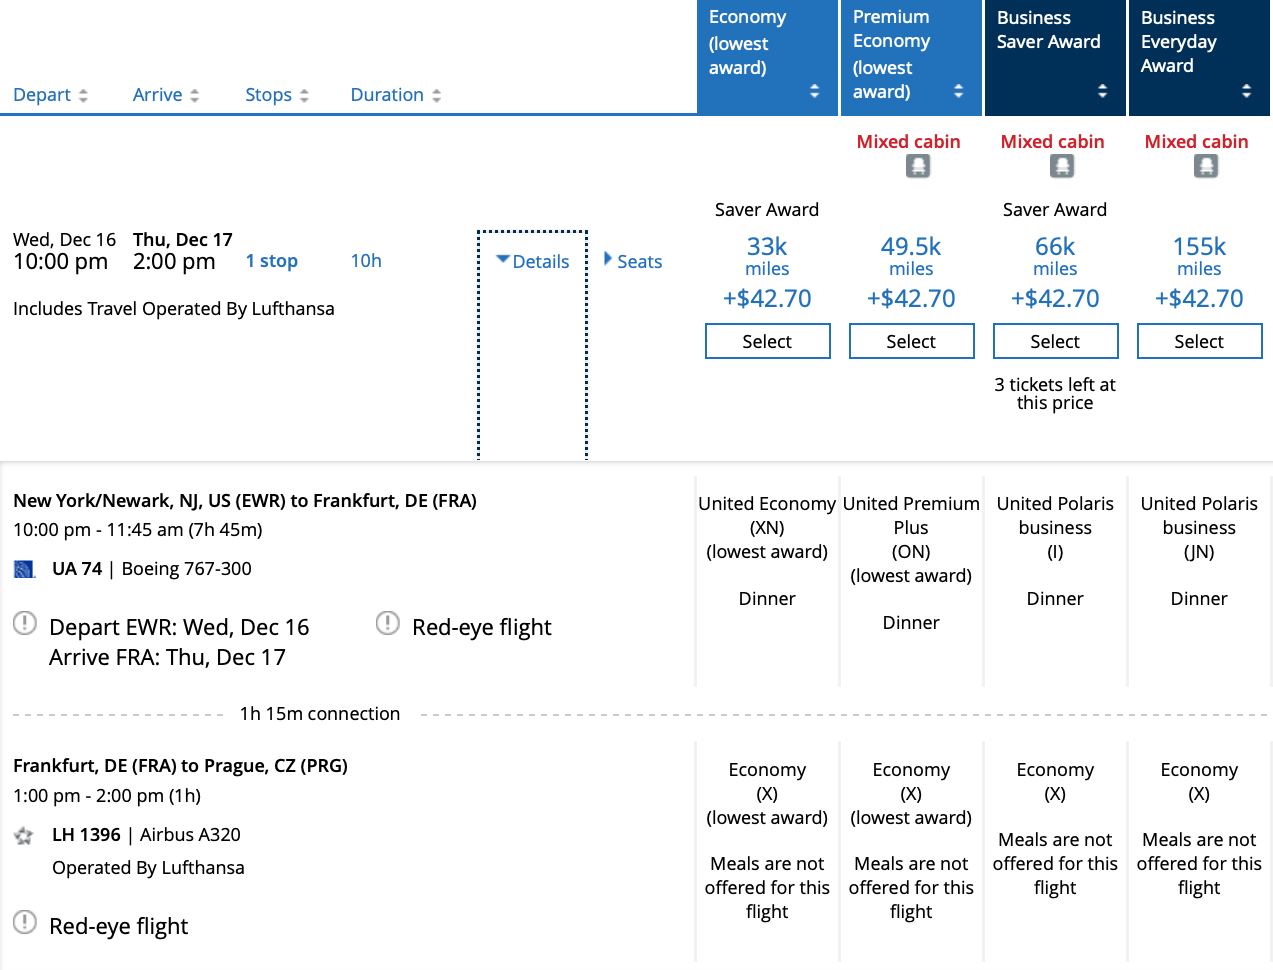 How to redeem miles with the United Airlines MileagePlus program